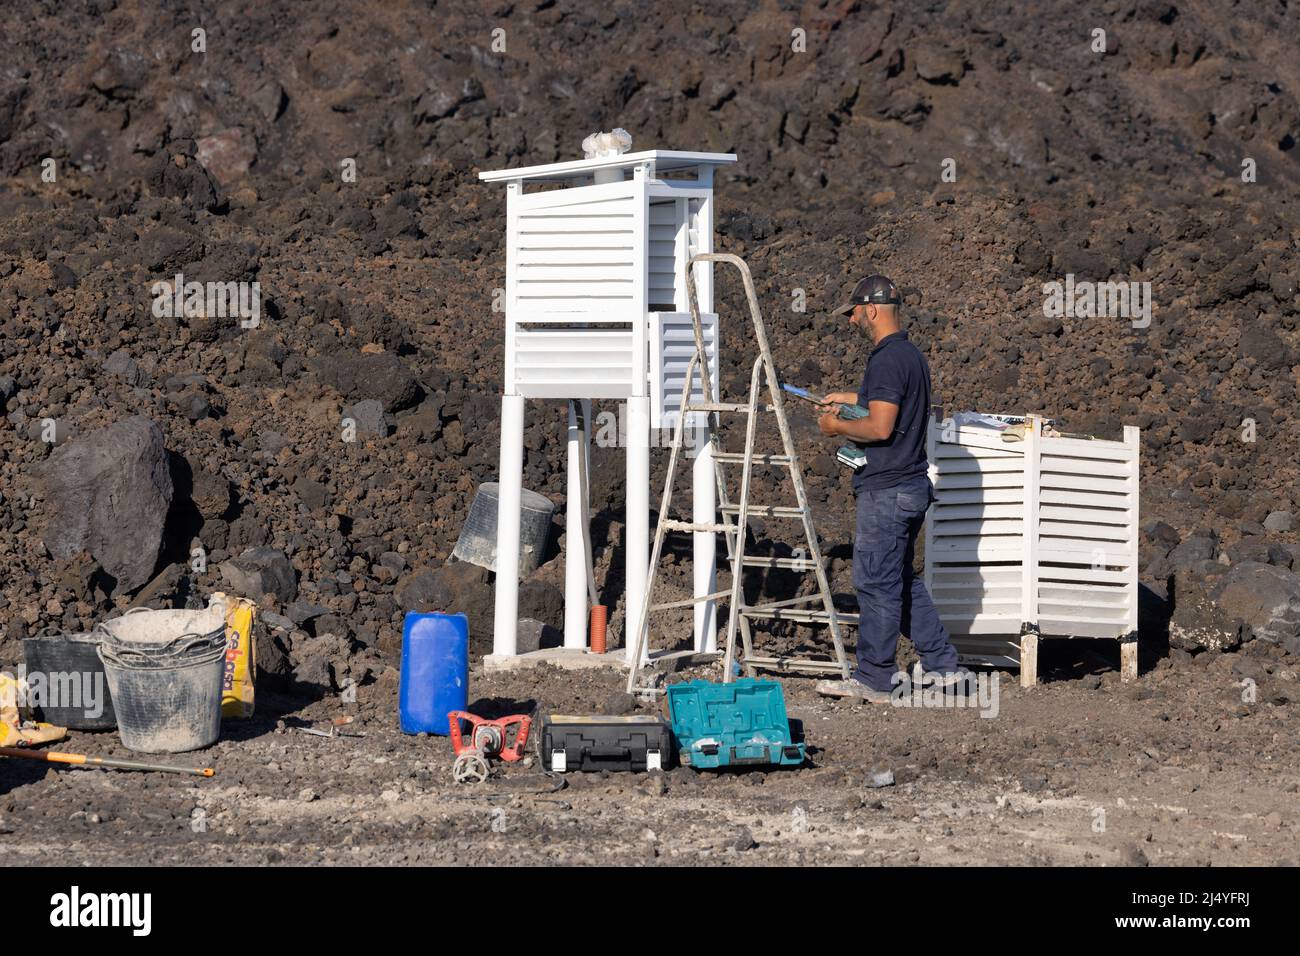 La Palma Island Spain - March 08, 2022: Man at work building a protective cover for meteorology instruments Stock Photo